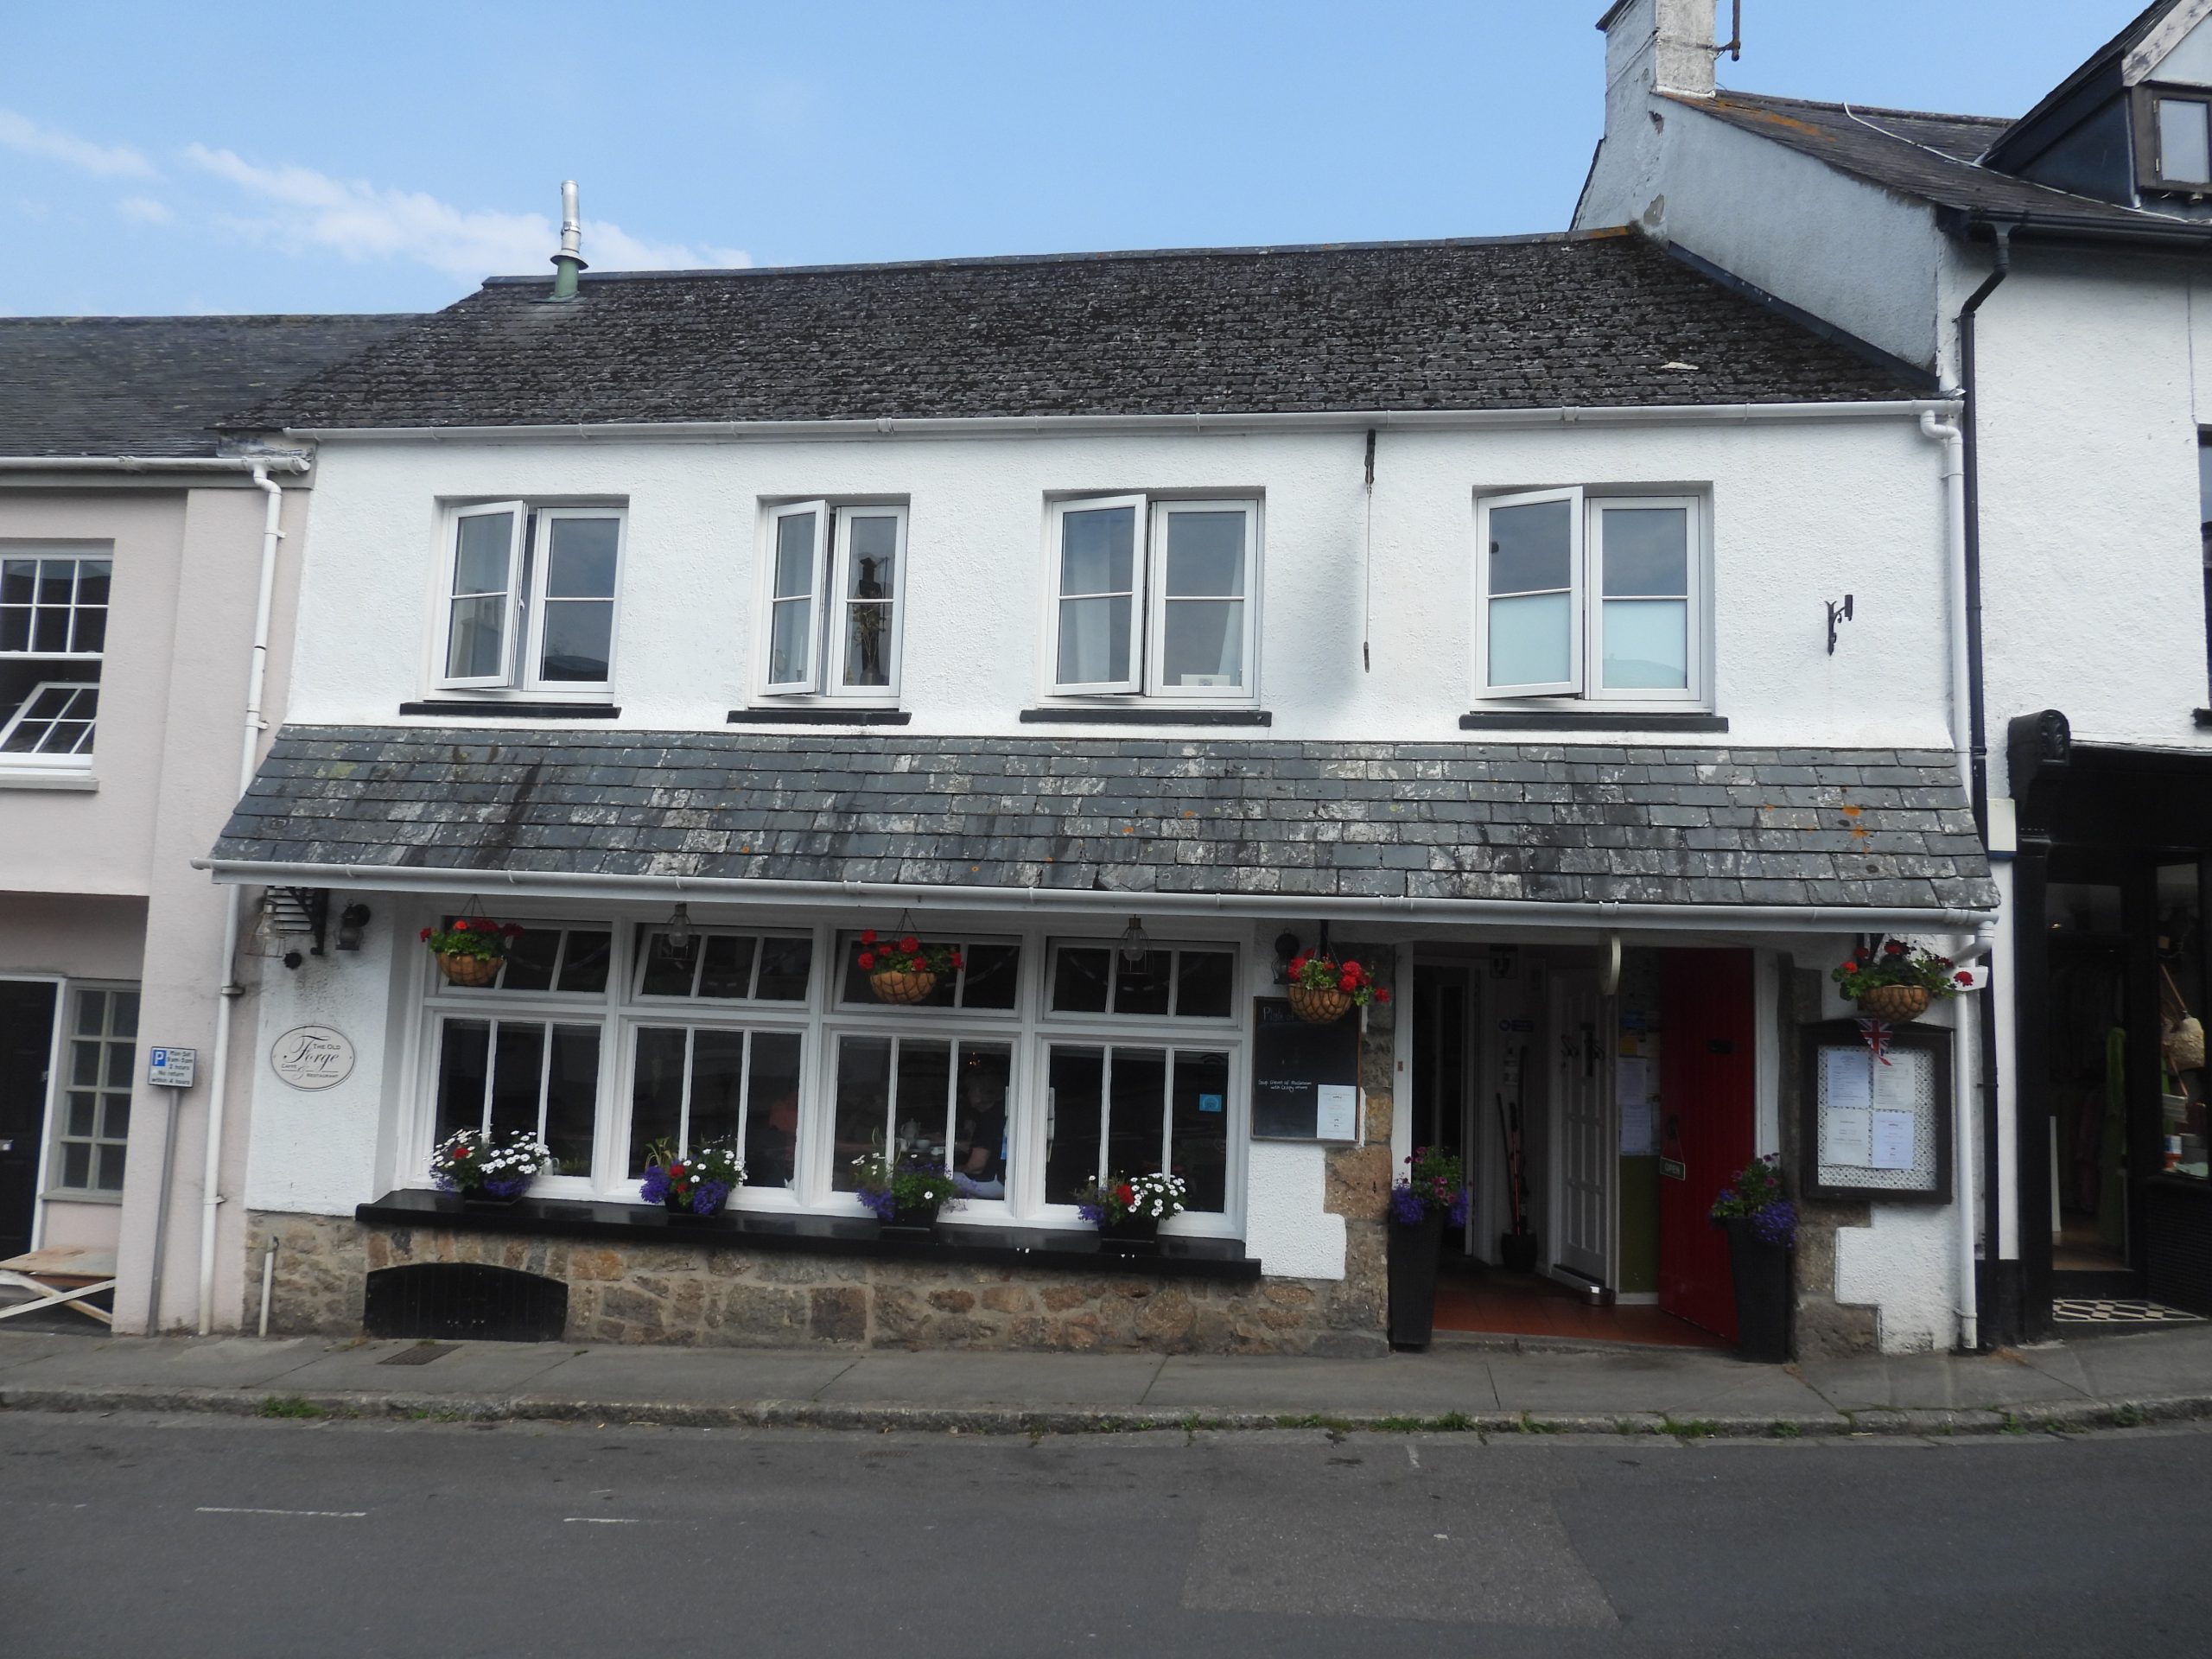 Chagford 44 - The Old Forge